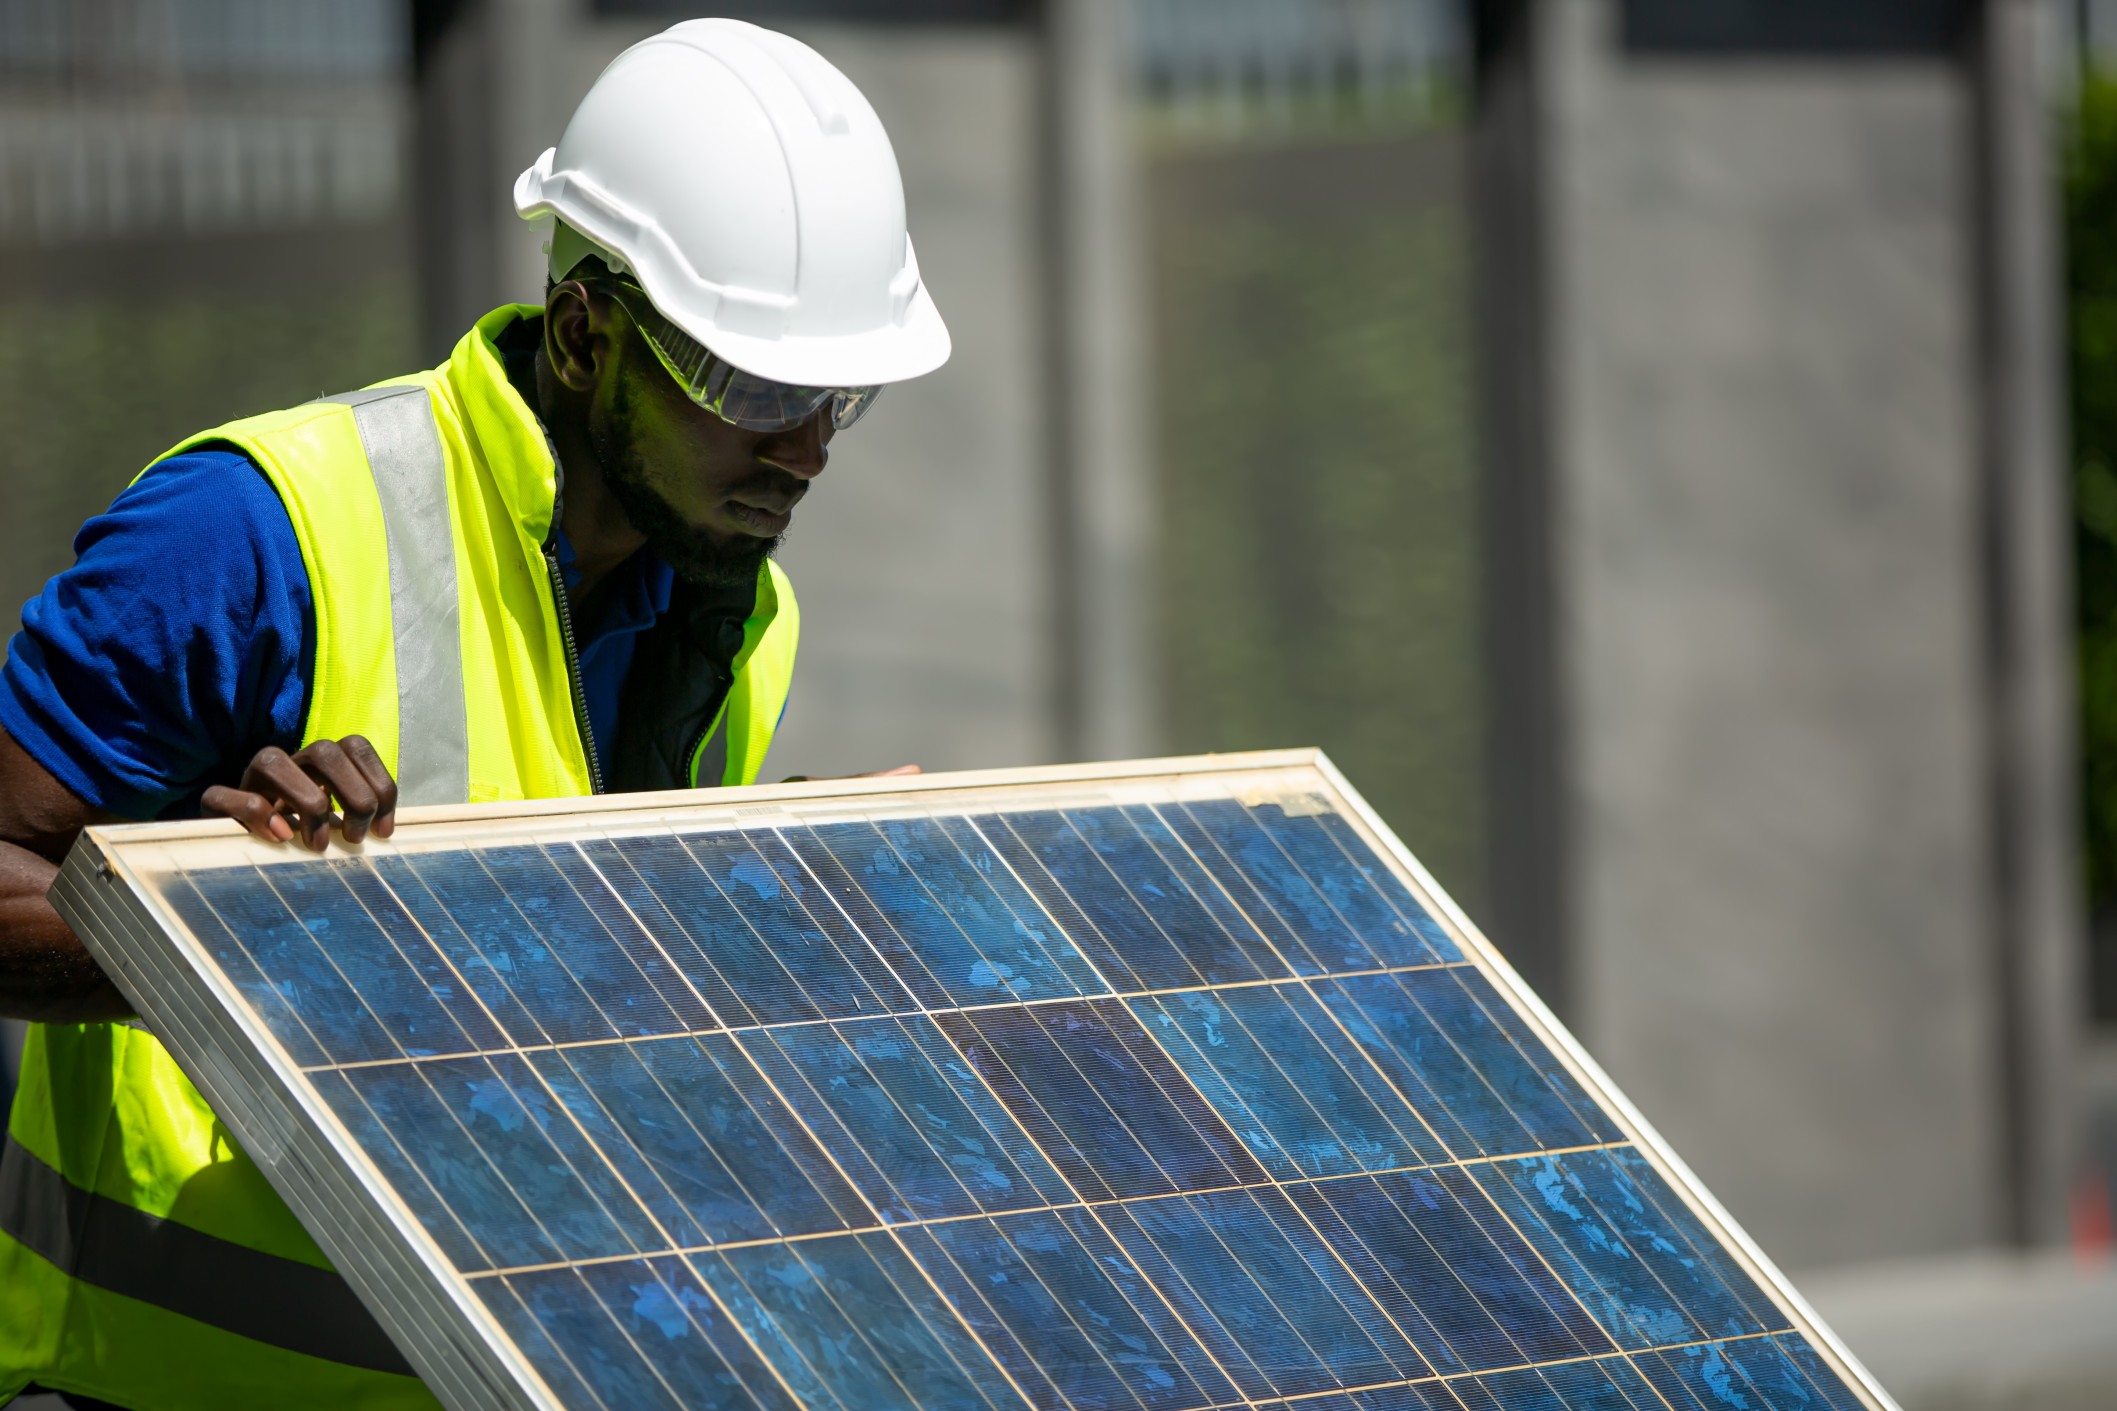 Construction worker performing analysis on solar panels.